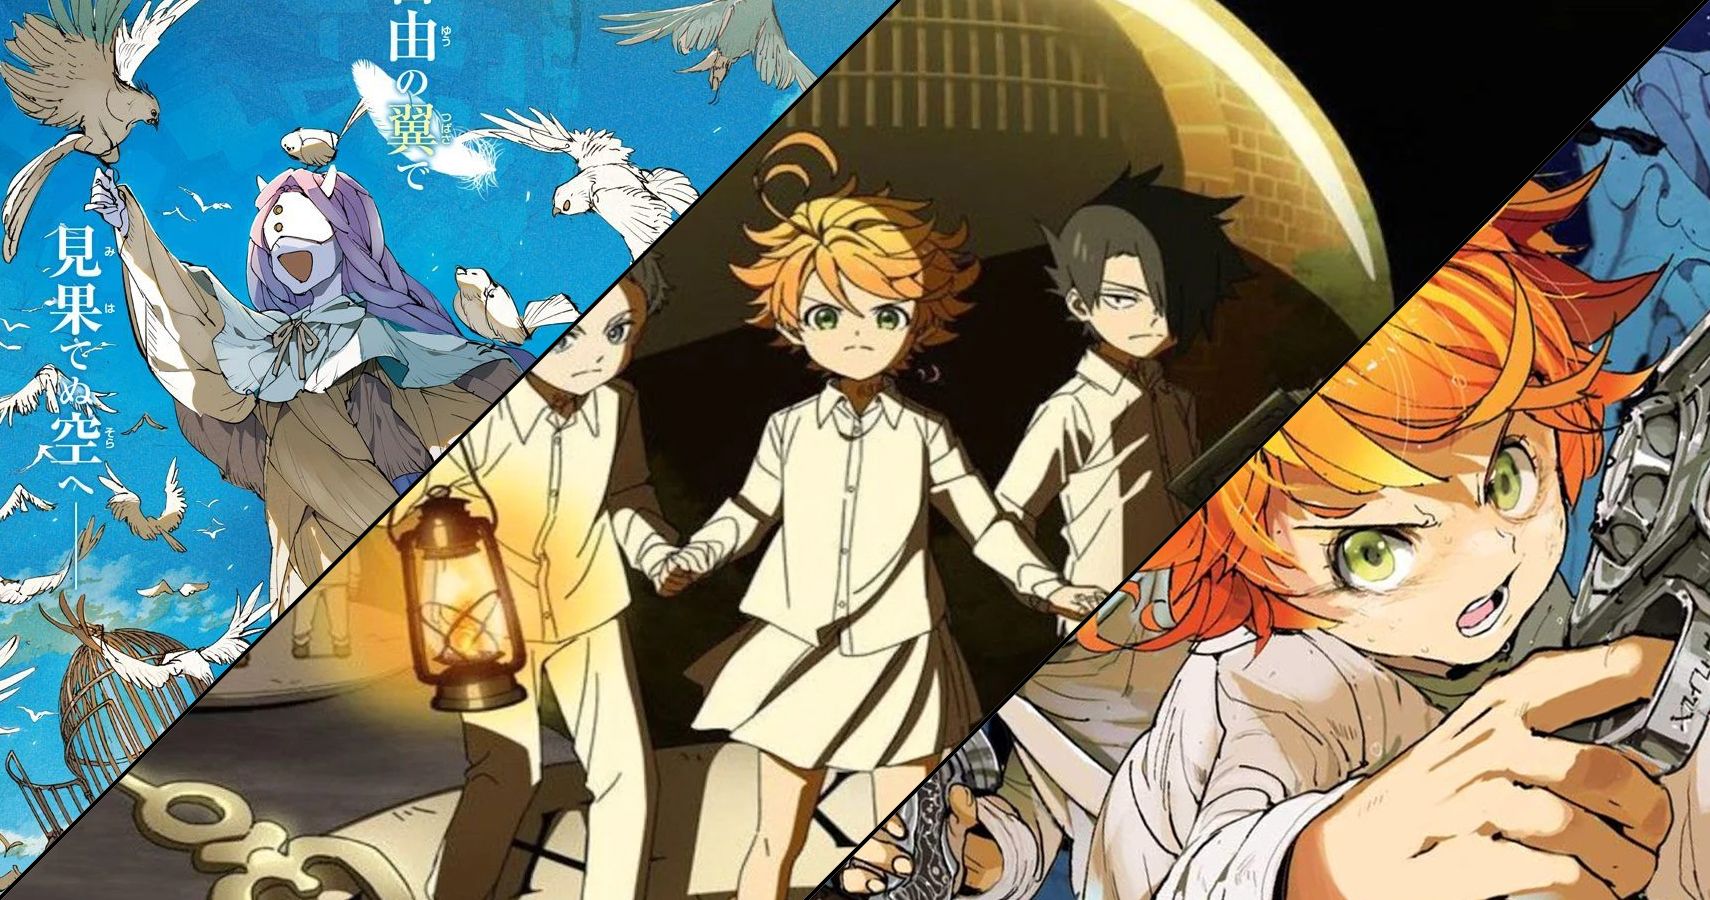 The Promised Neverland 5 Ways The Ending Was Perfect 5 Ways It Fell Short